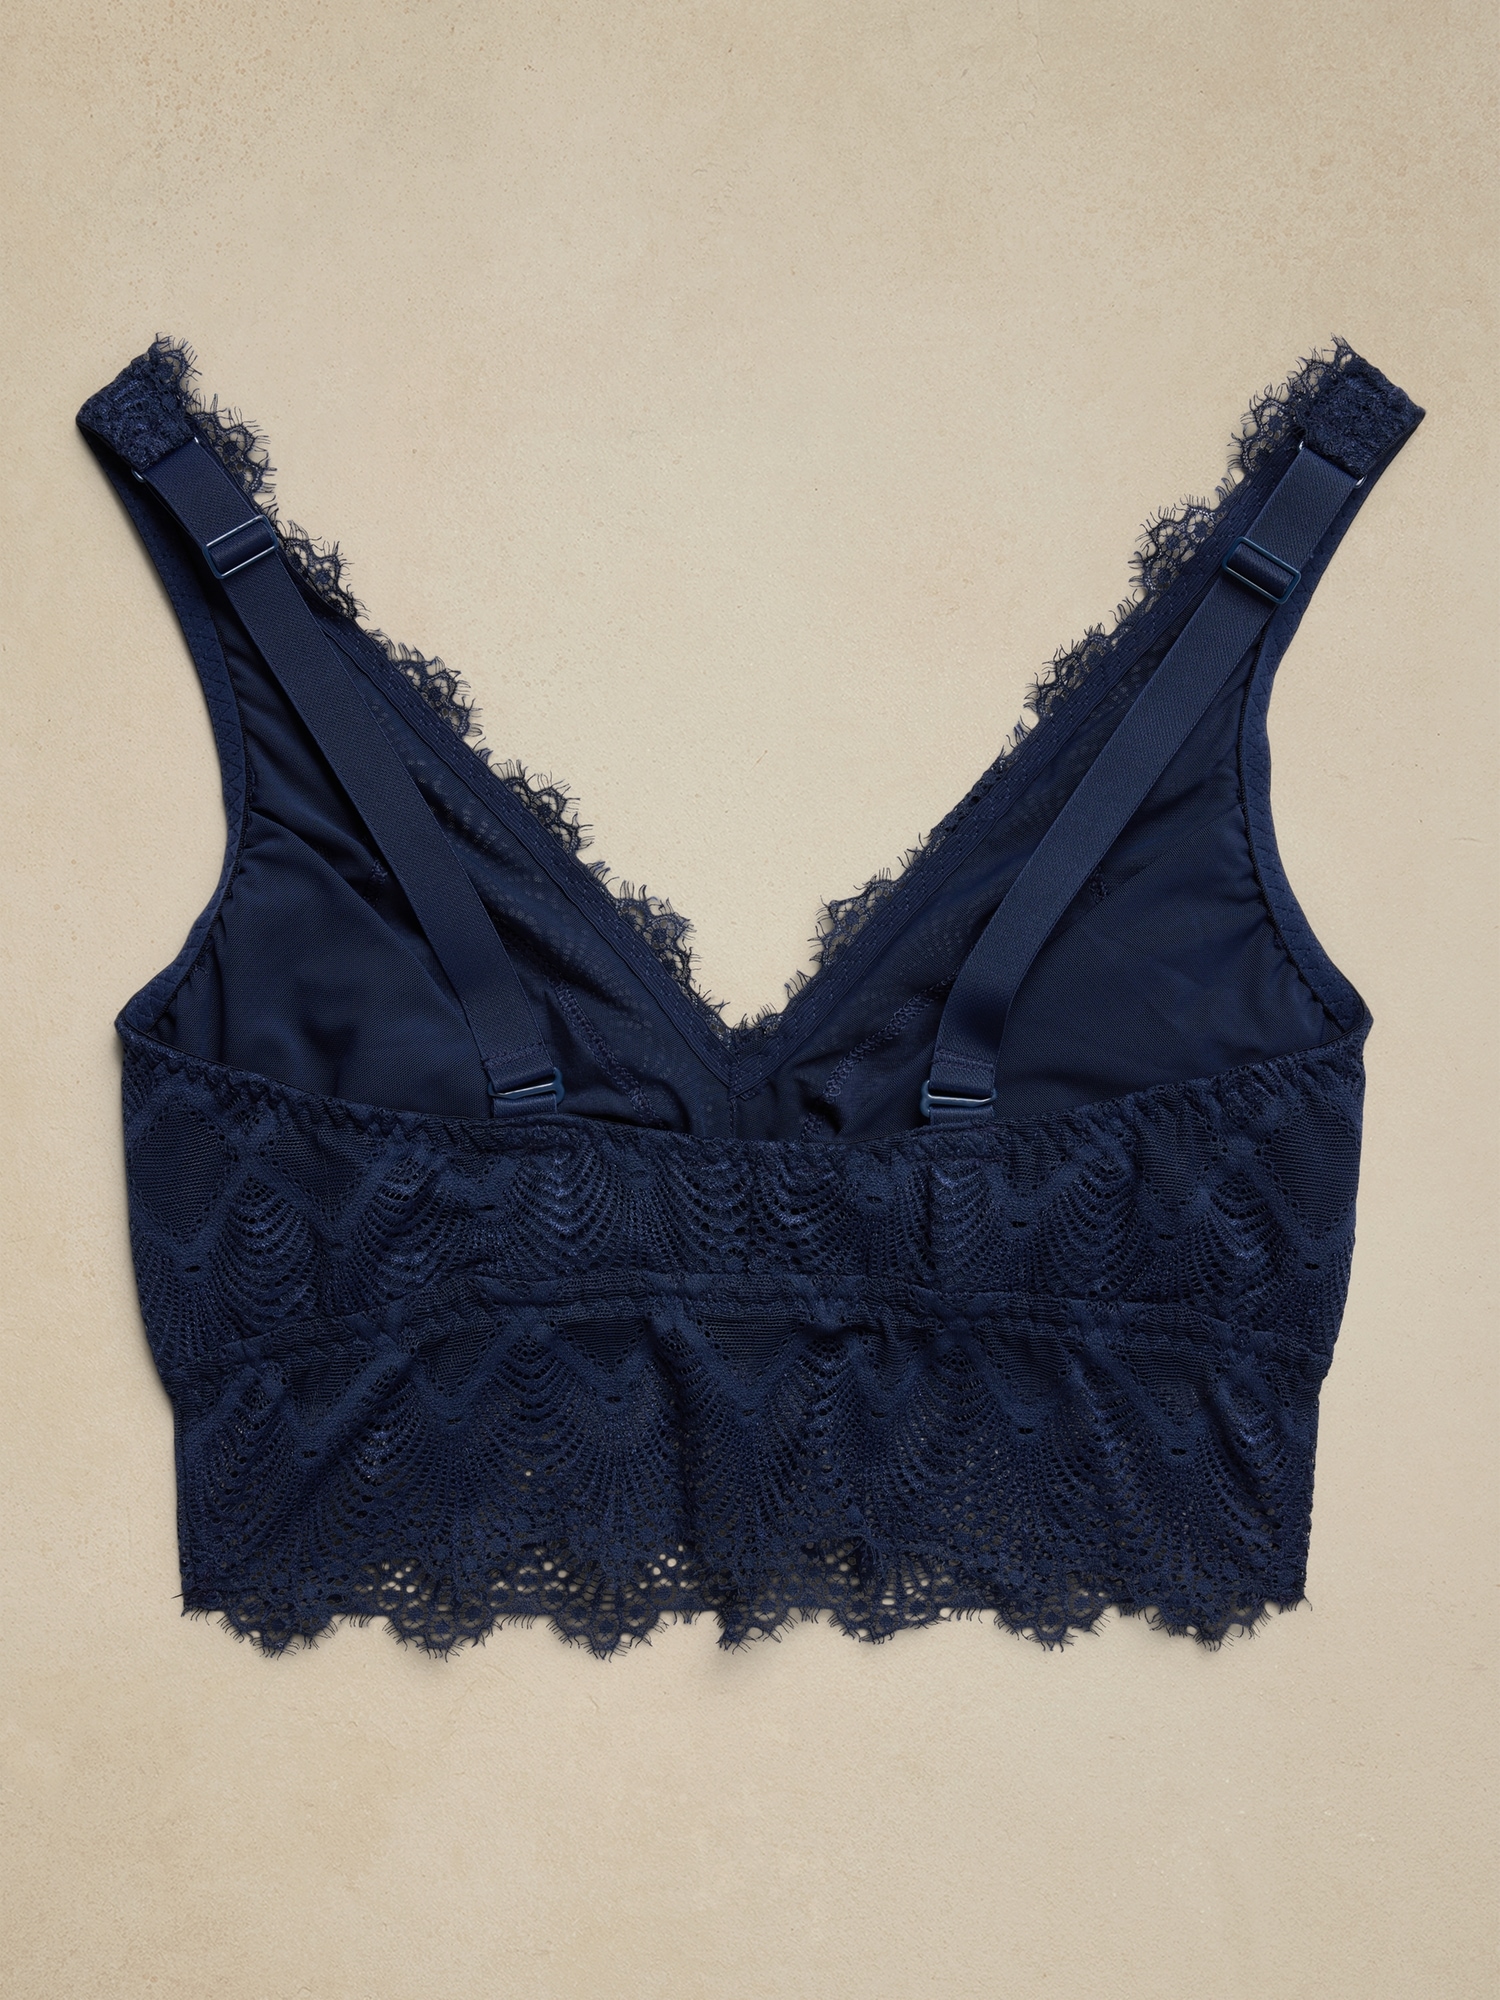 Cosabella Paradiso Petite Triangle Bralette in Navy Blue FINAL